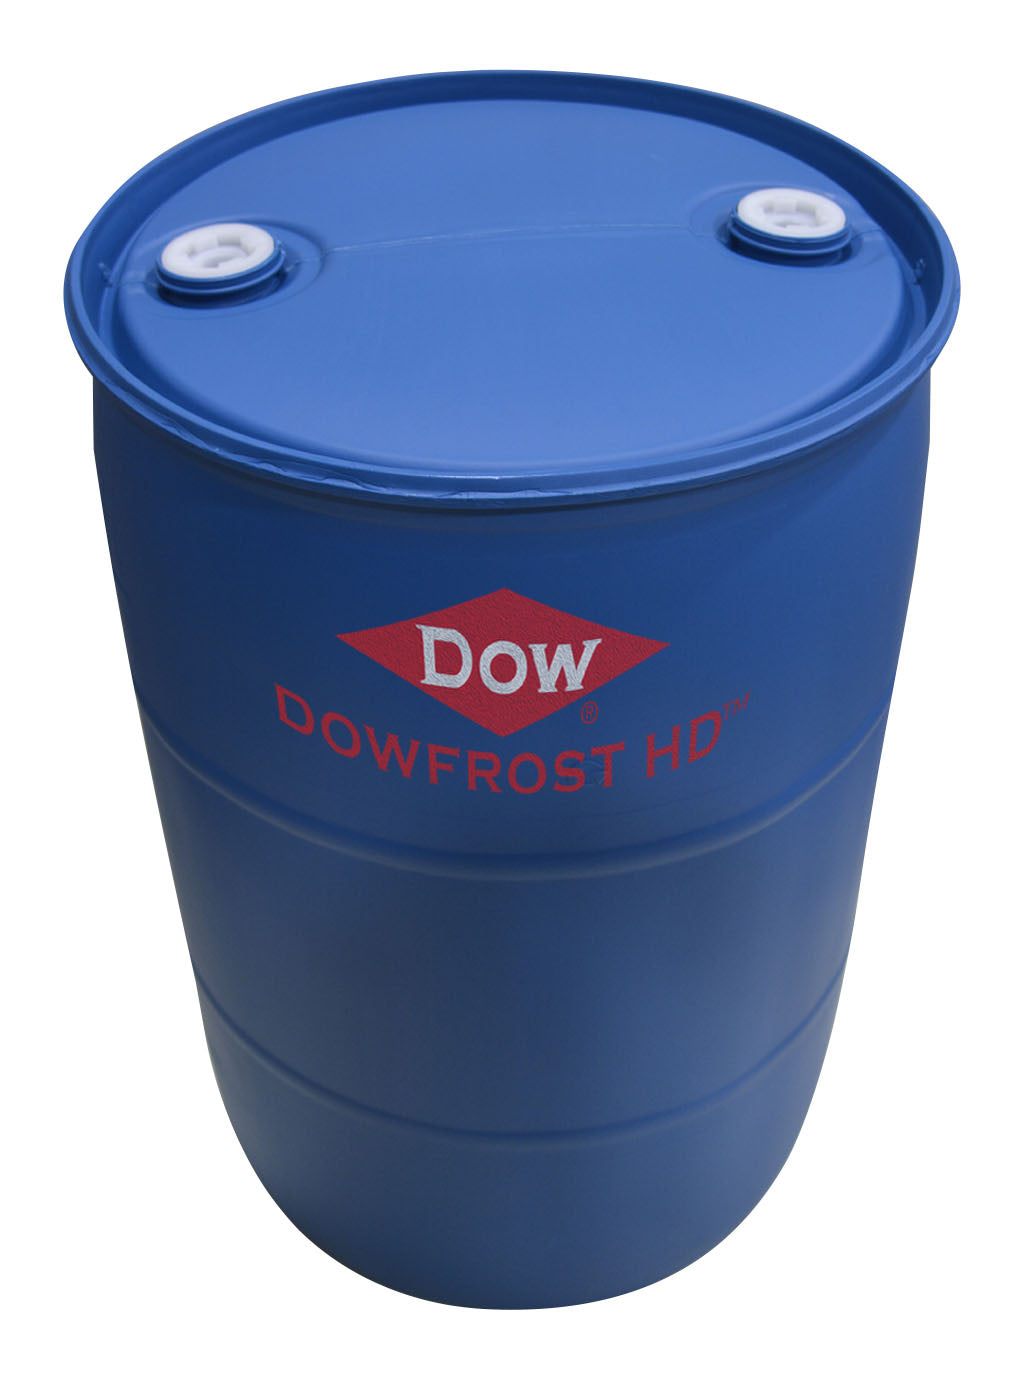 DOWFROST HD inhibited propylene glycol in a 55 gallon blue plastic drum.